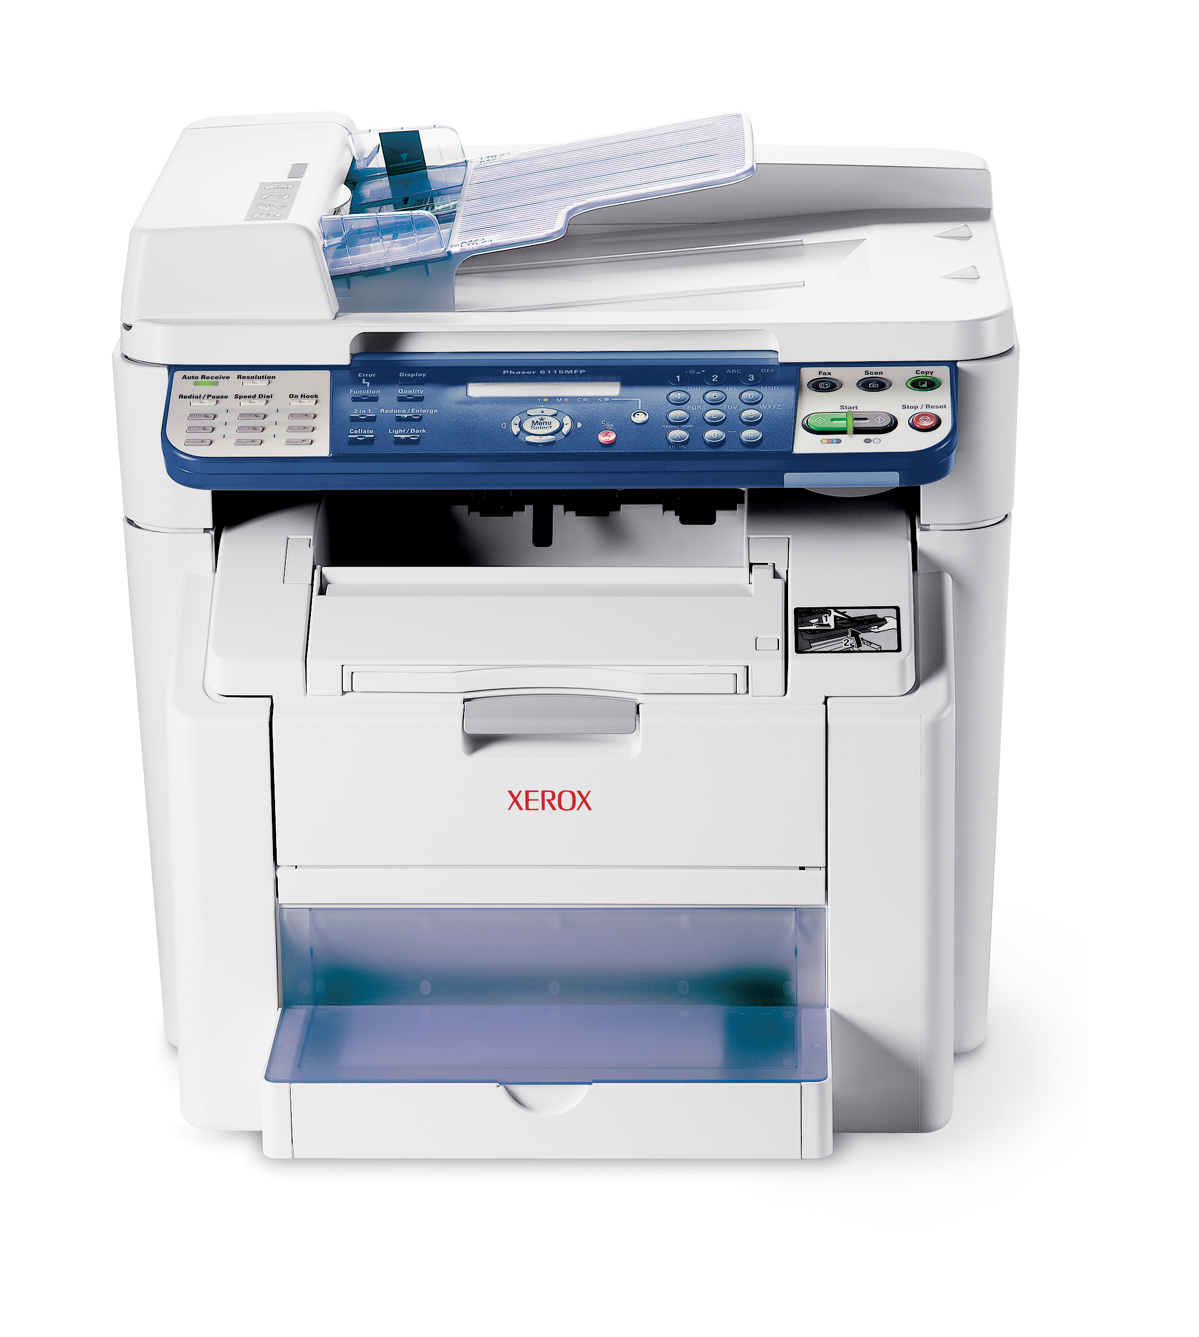 Phaser 6115MFP/N Multifonction Couleur Avec Impression/Copie/Scan/Fax  6115MFPV/N - Xerox